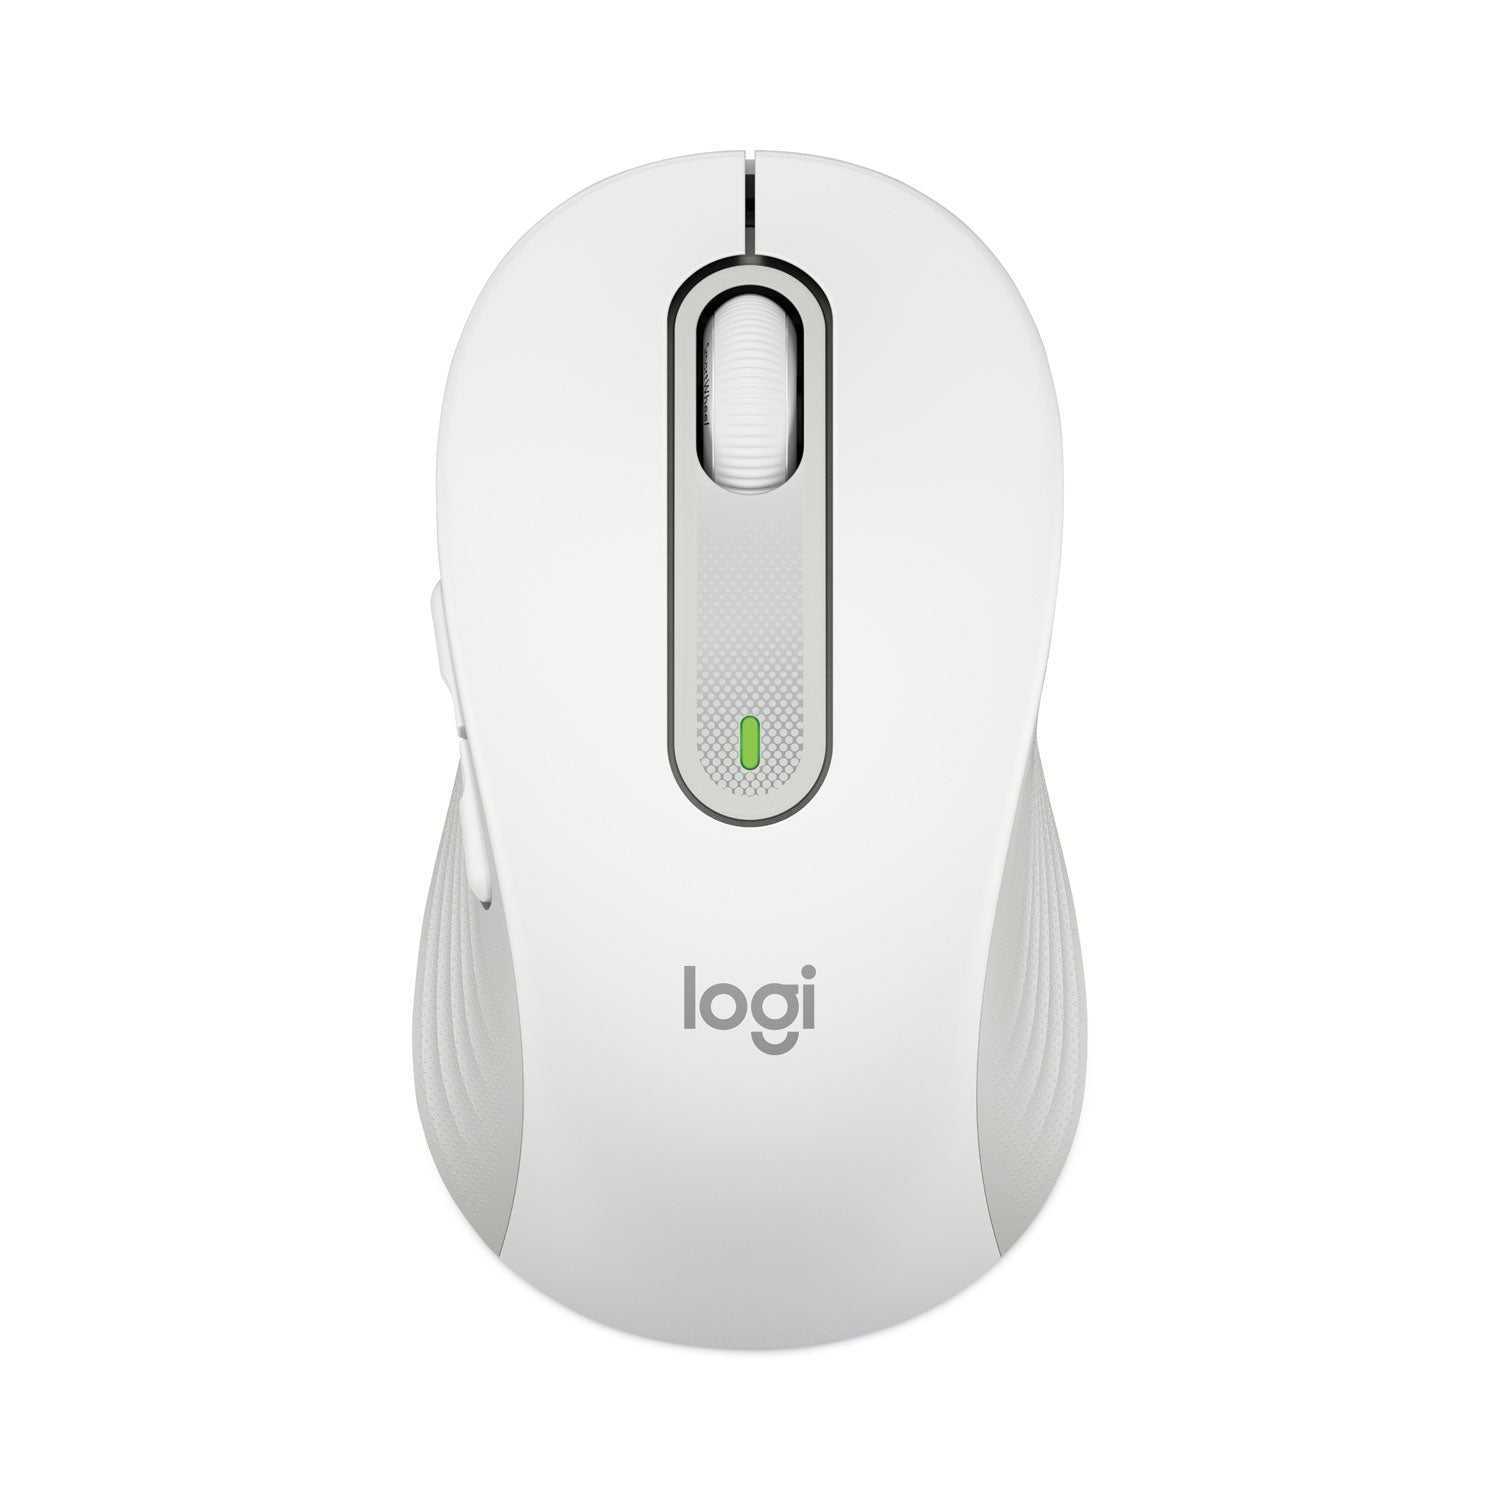 signature-m650-for-business-wireless-mouse-large-24-ghz-frequency-33-ft-wireless-range-right-hand-use-off-white_log910006347 - 1